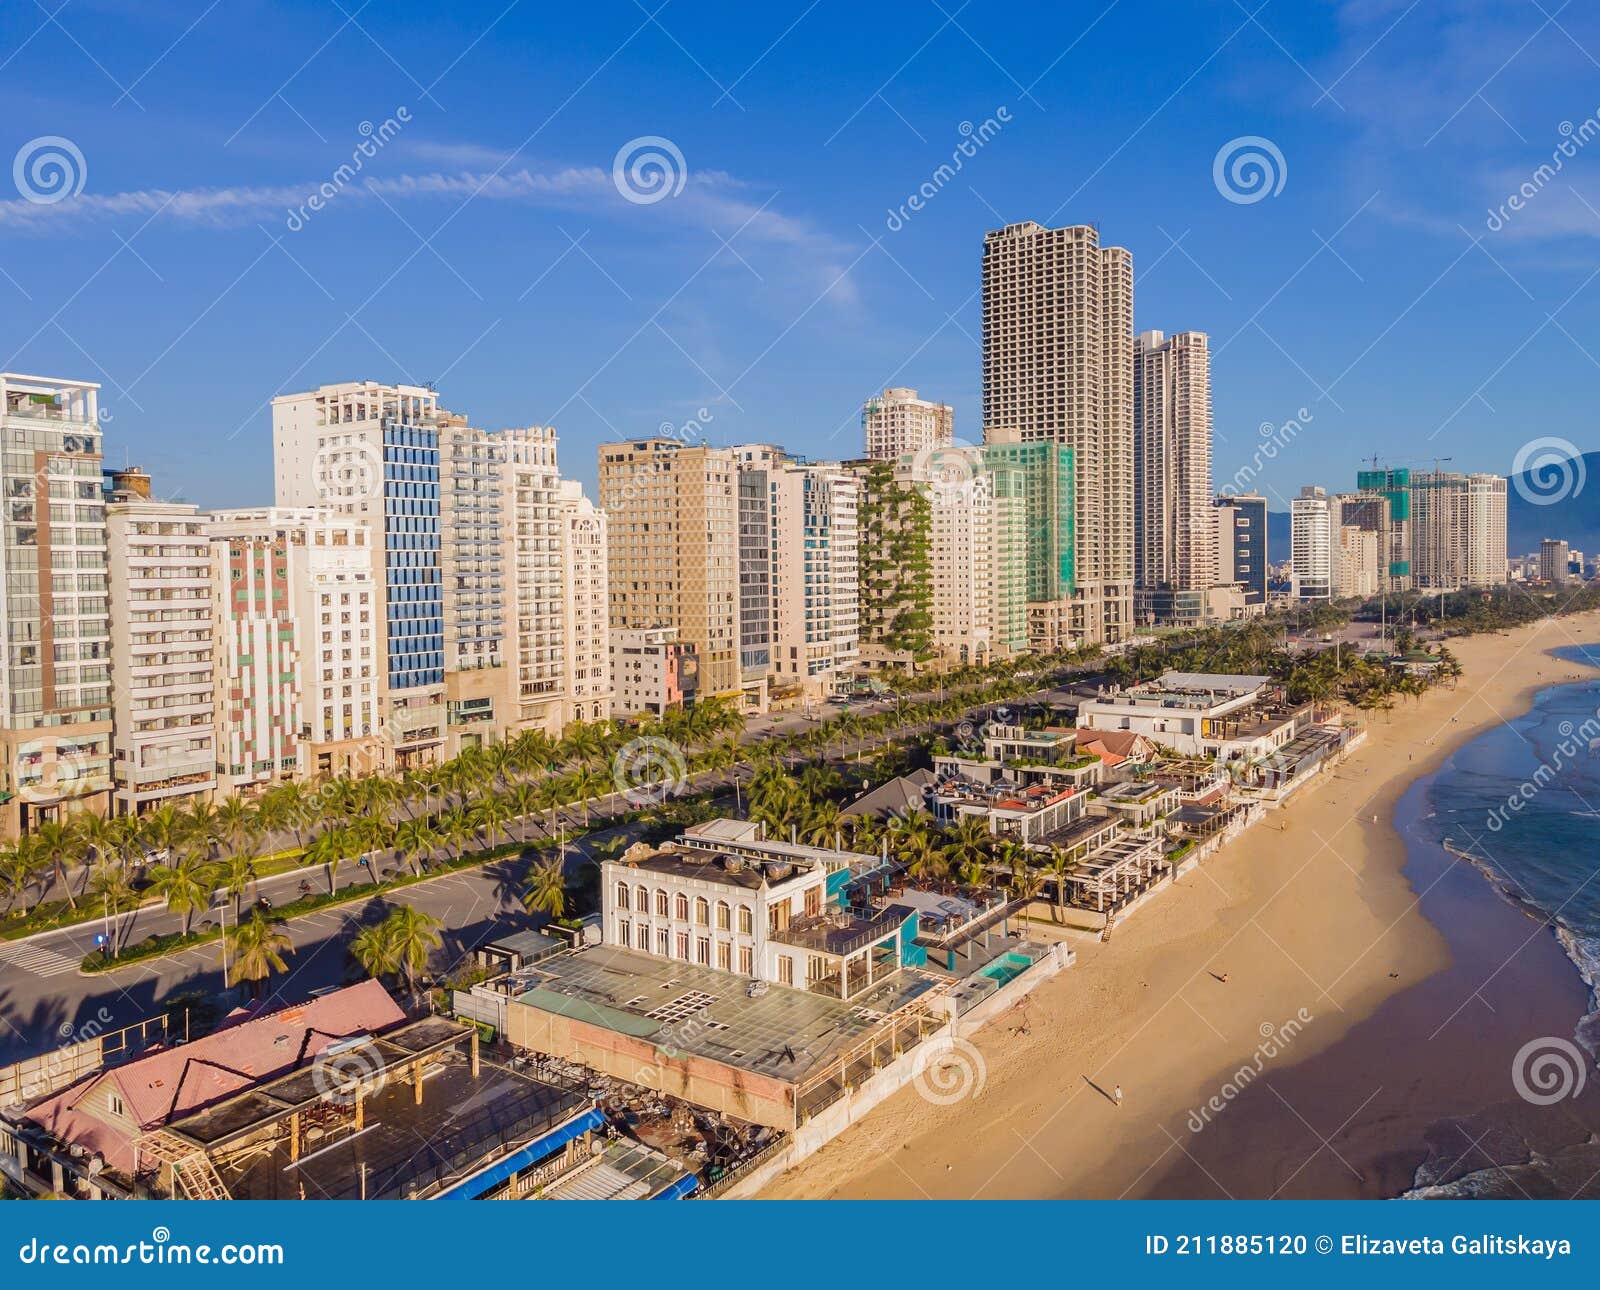 My Khe Beach from Drone in Da Nang, Vietnam, Street and Buildings Near Central Beach and the Sea. Photo Stock Photo Image of asia, nang: 211885120